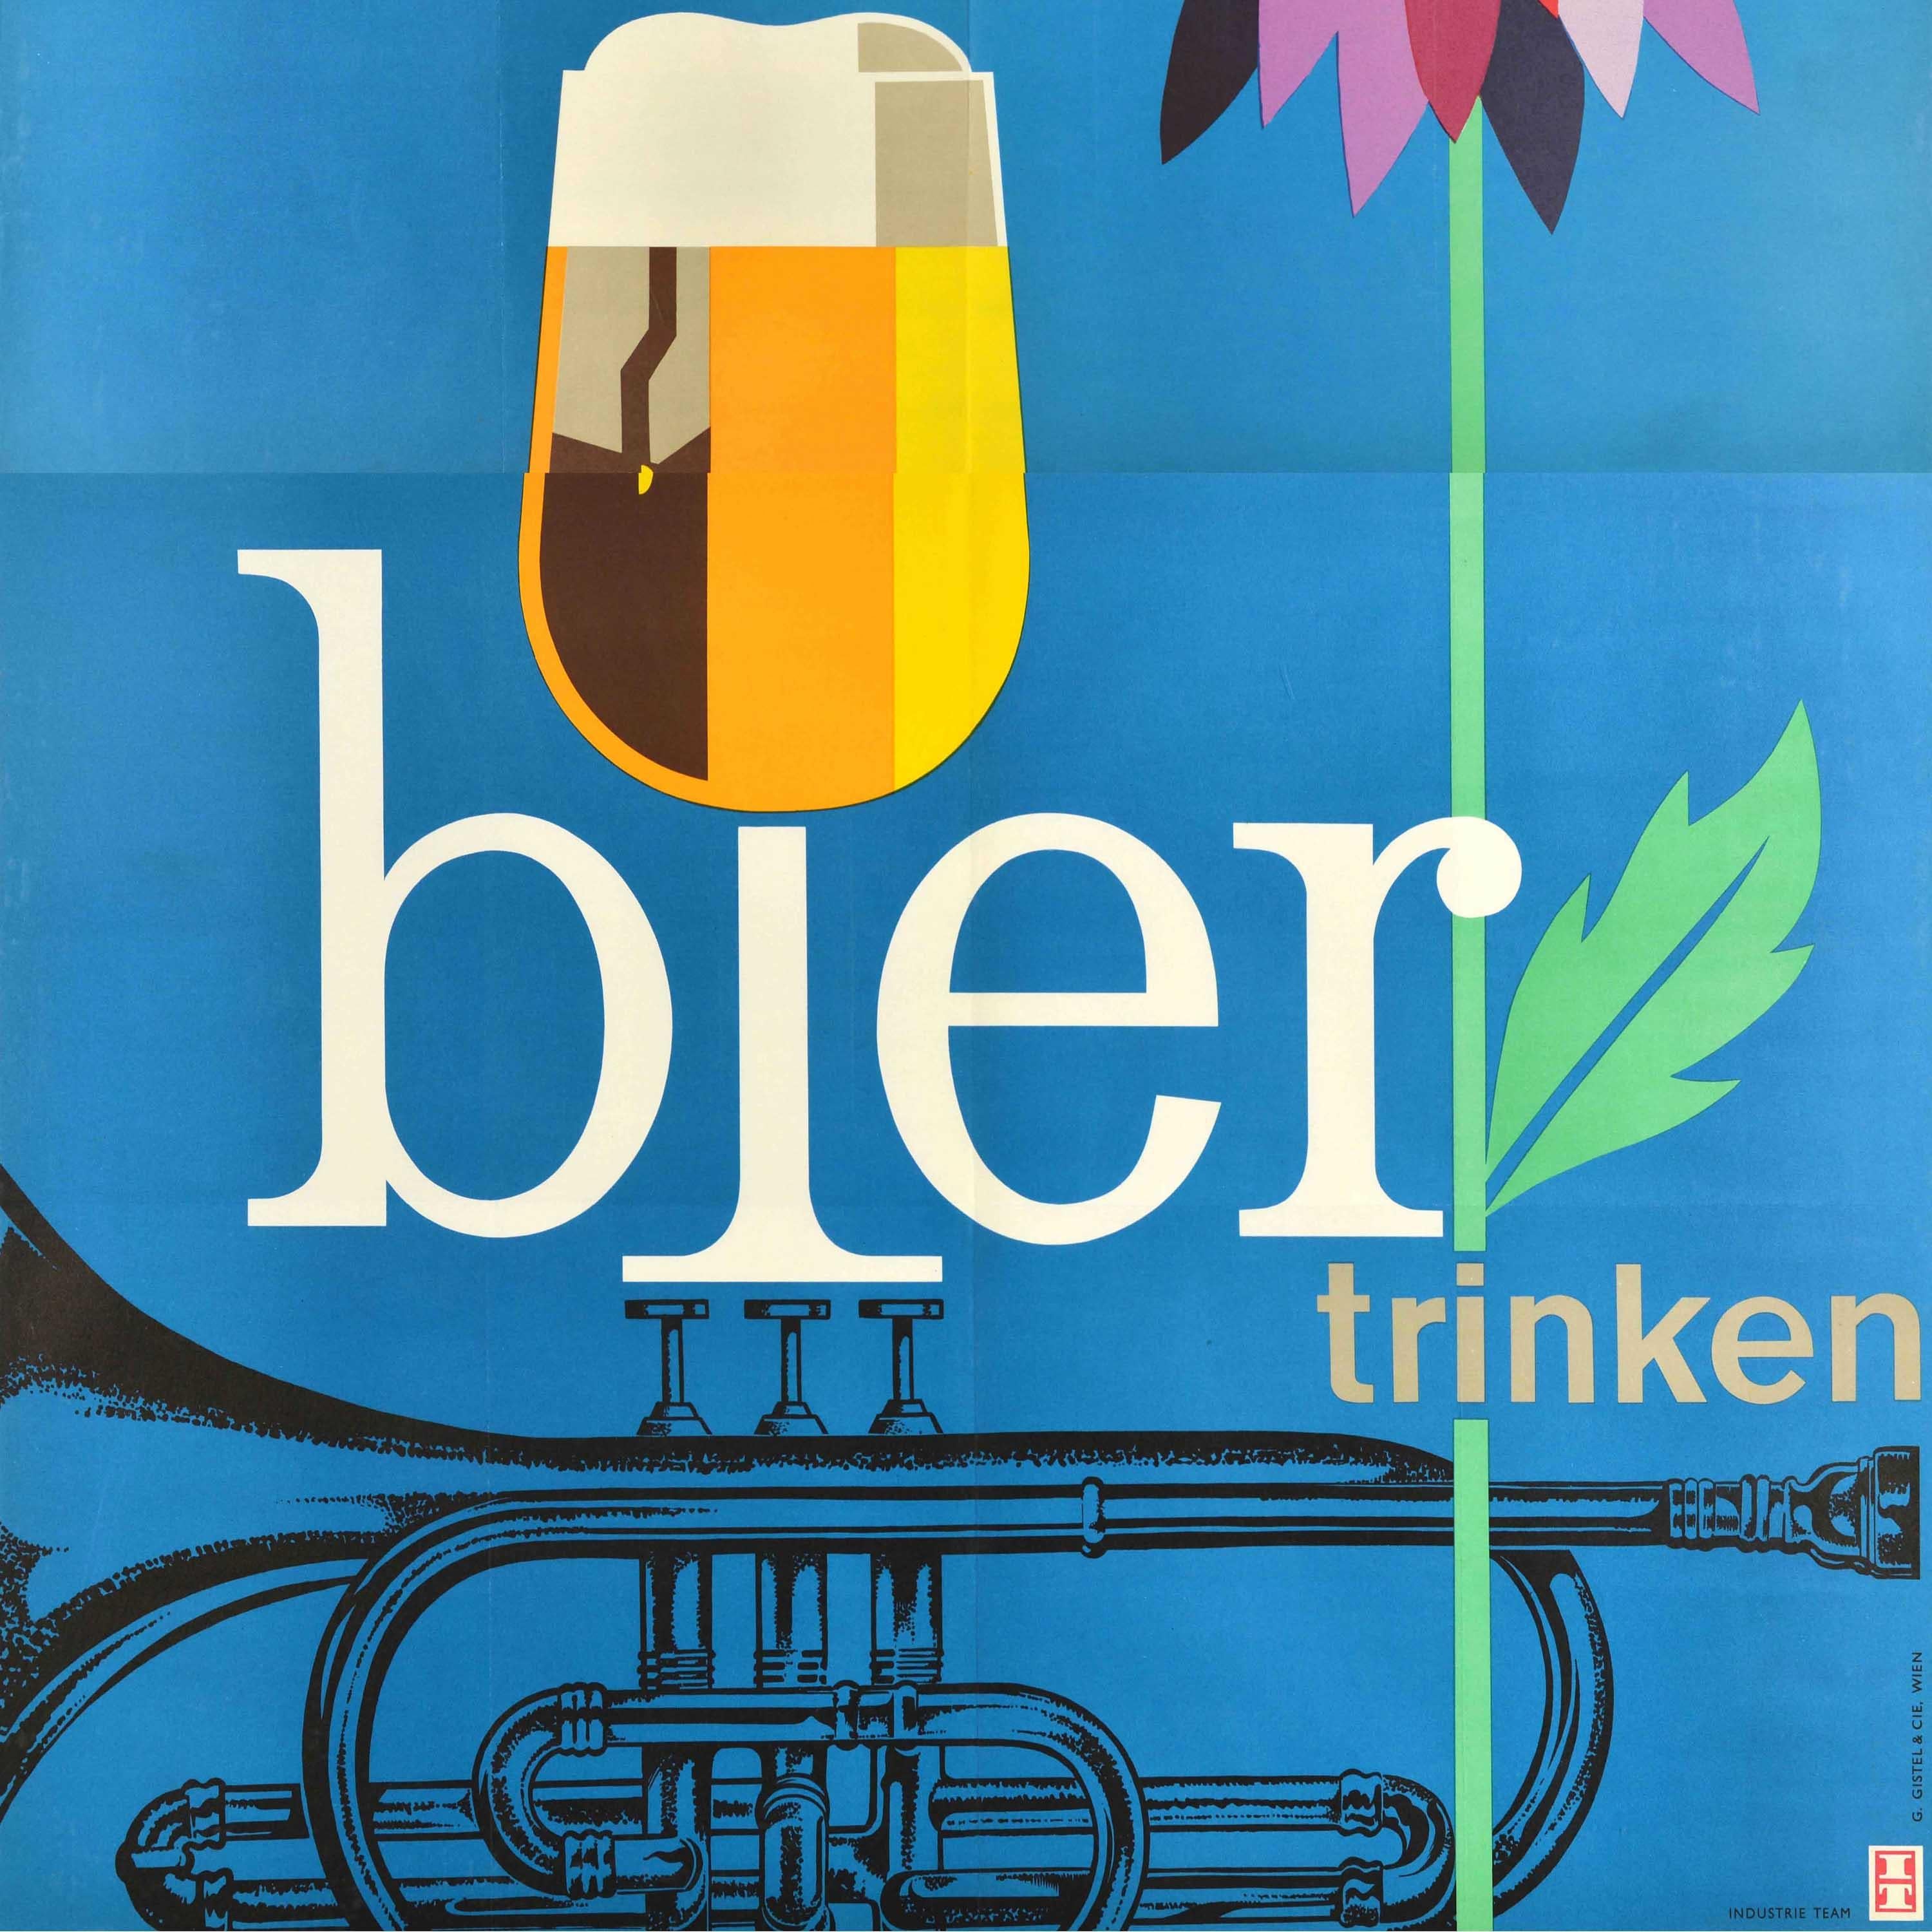 Original Vintage Advertising Poster Drink Beer Moderately Flower Trumpet Alcohol In Good Condition For Sale In London, GB